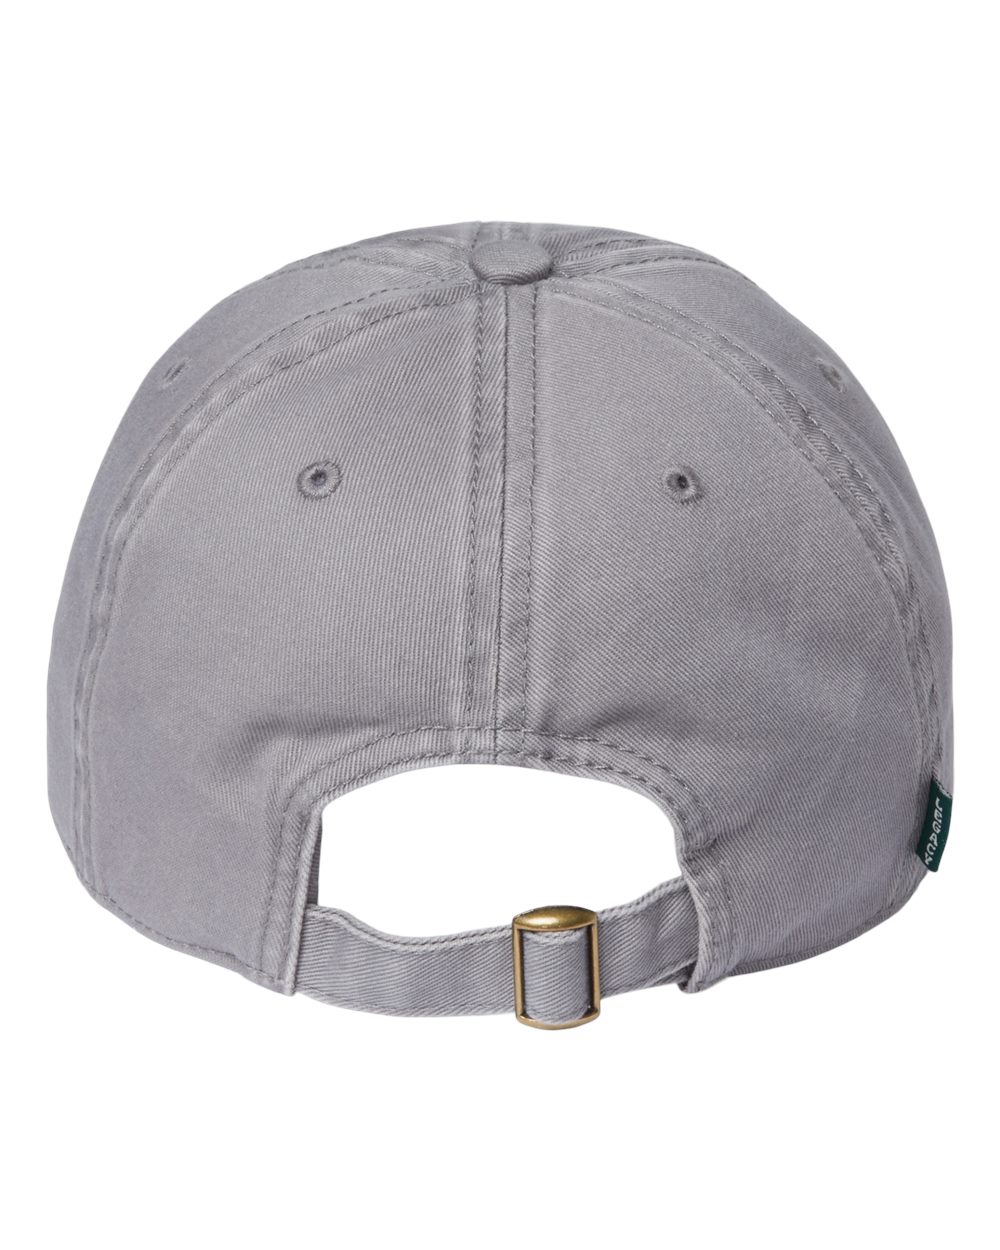 FREIGHT TRAIN LACROSSE CLUB "THE FERRICK" DAD HAT - GRAY